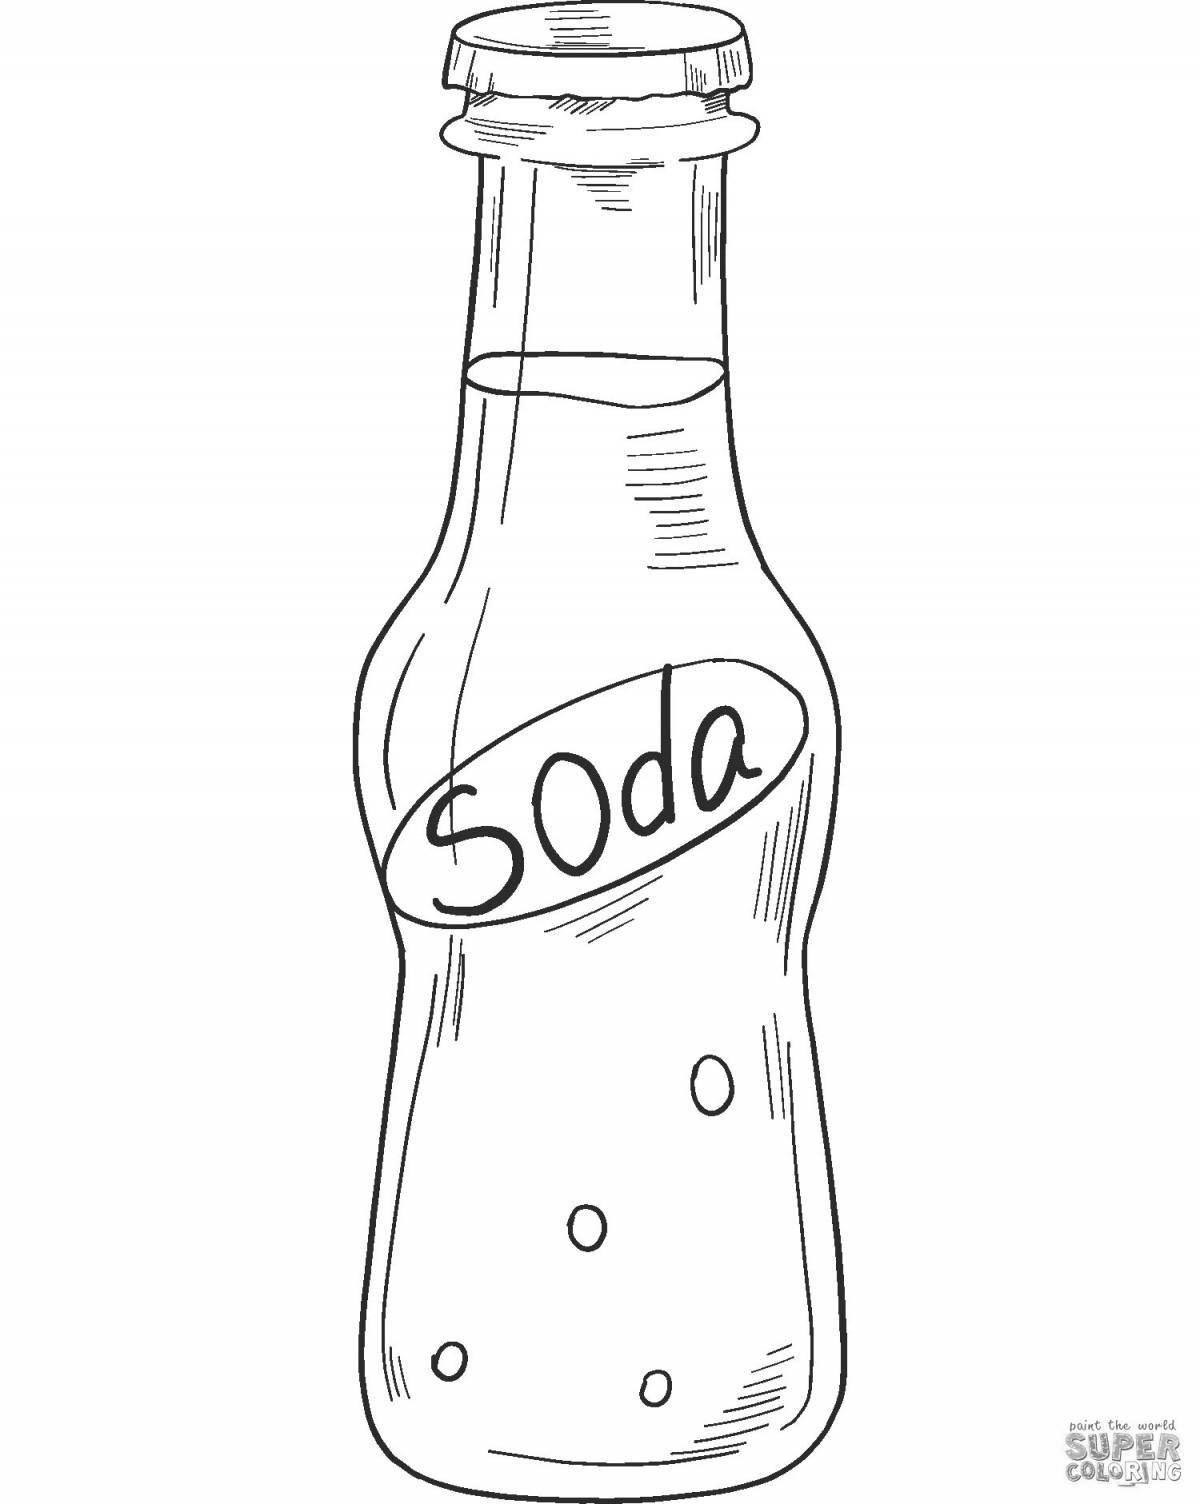 Luminous coke can coloring page